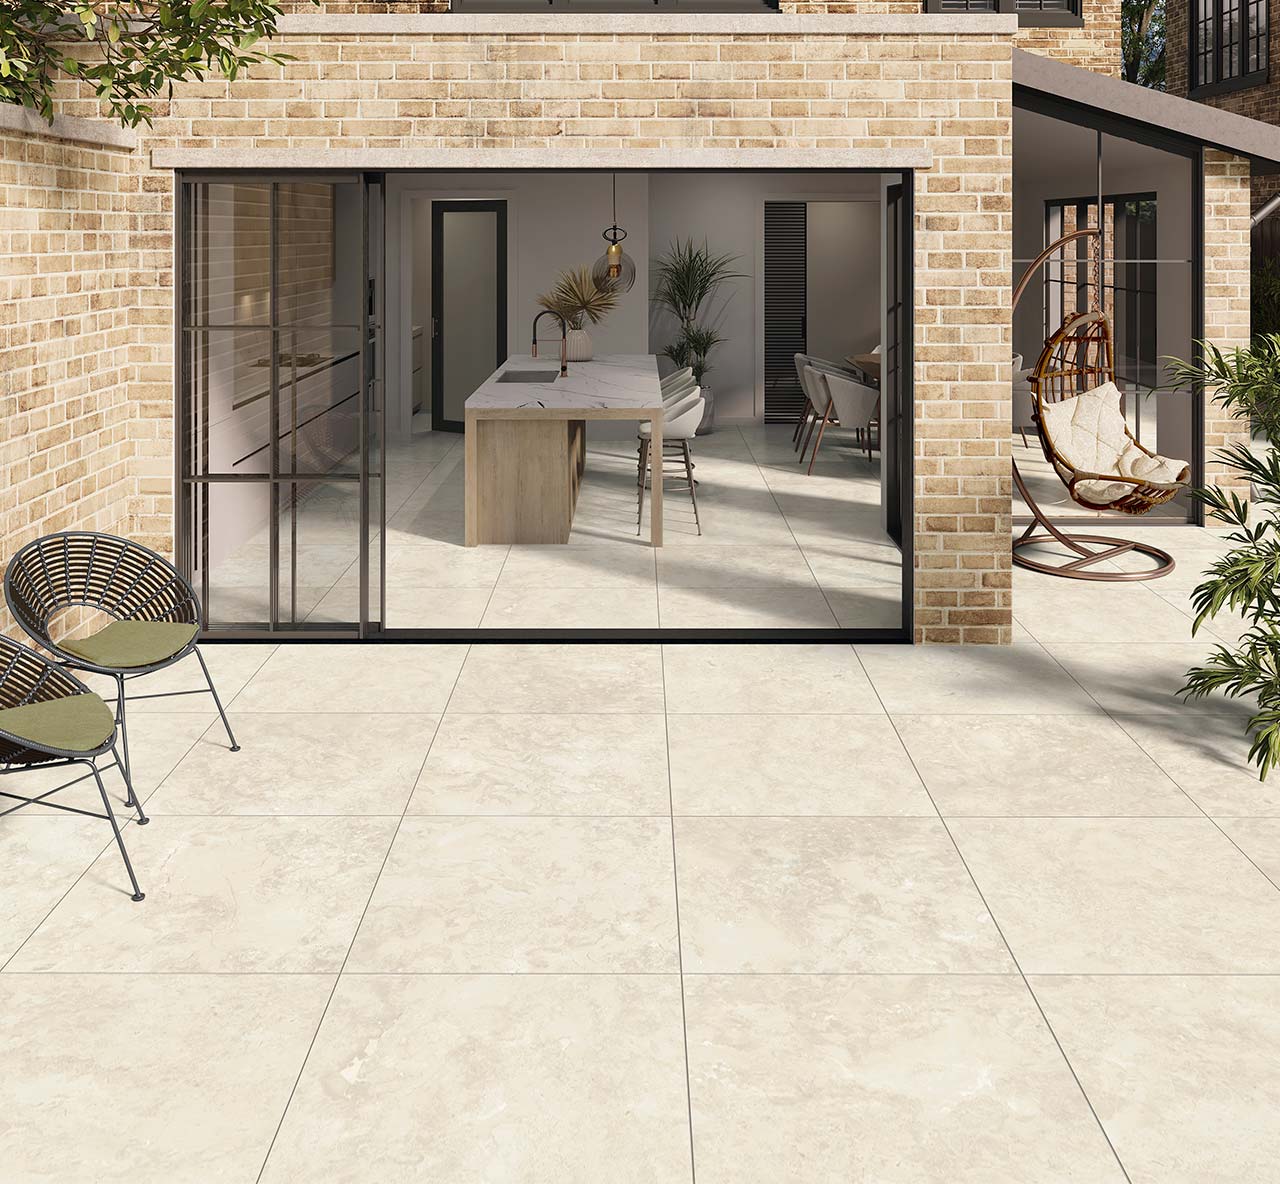 Valverdi Catania stone effect Outdoor Tiles used in a sun washed patio with matching indoor Catania tiles